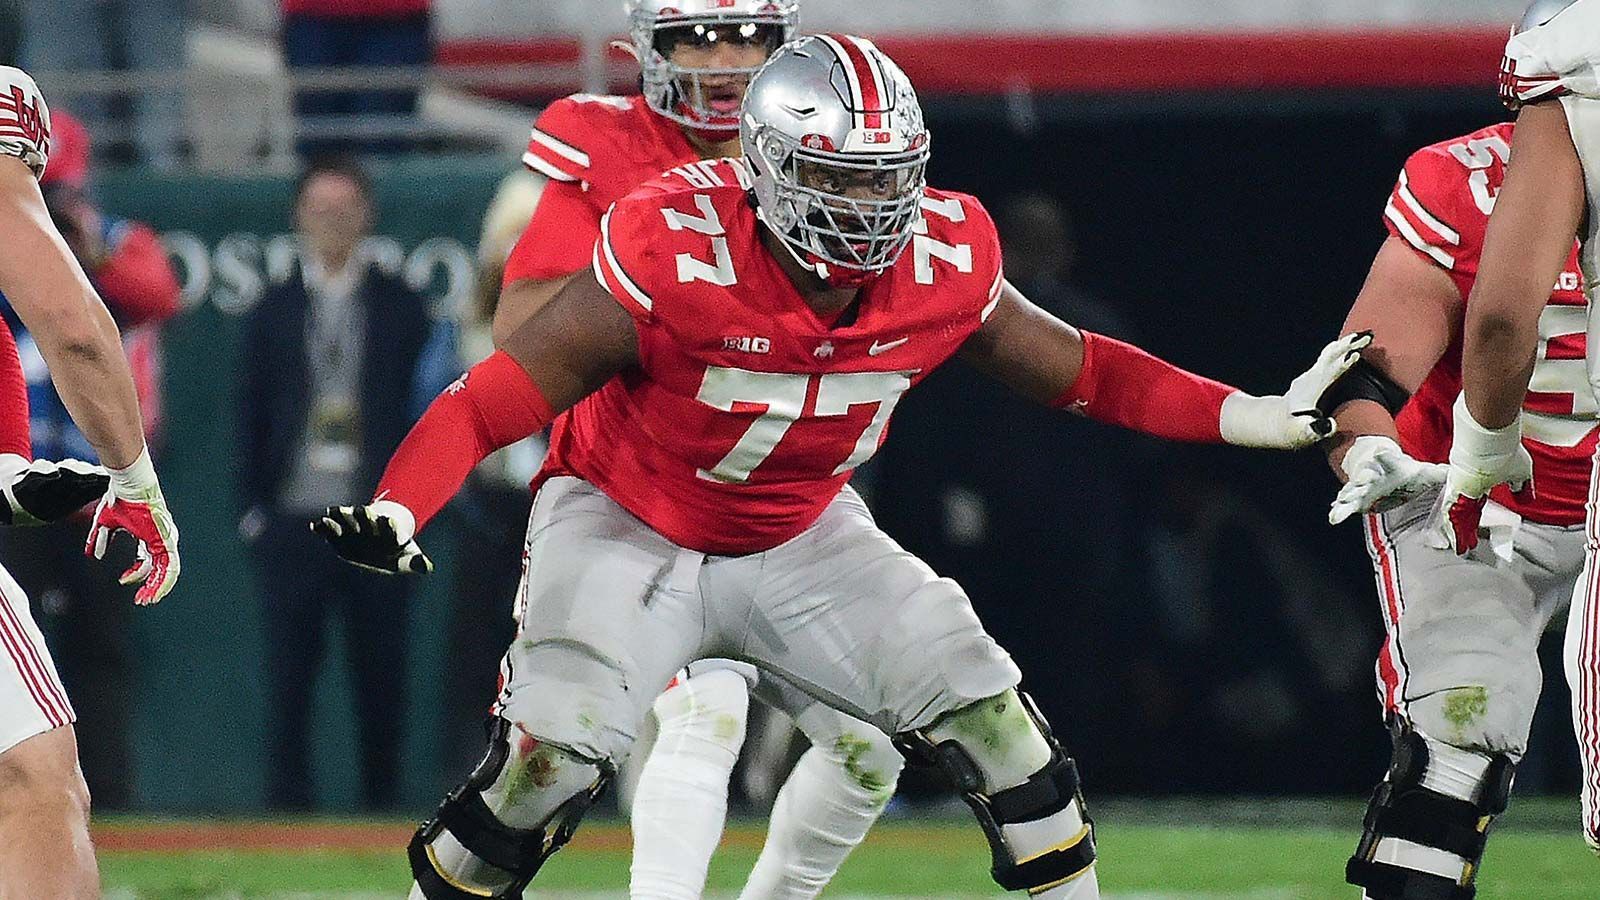 
                <strong>Paris Johnson Jr.</strong><br>
                &#x2022; Position: Offensive Tackle<br>&#x2022; College: Ohio State University<br>
              